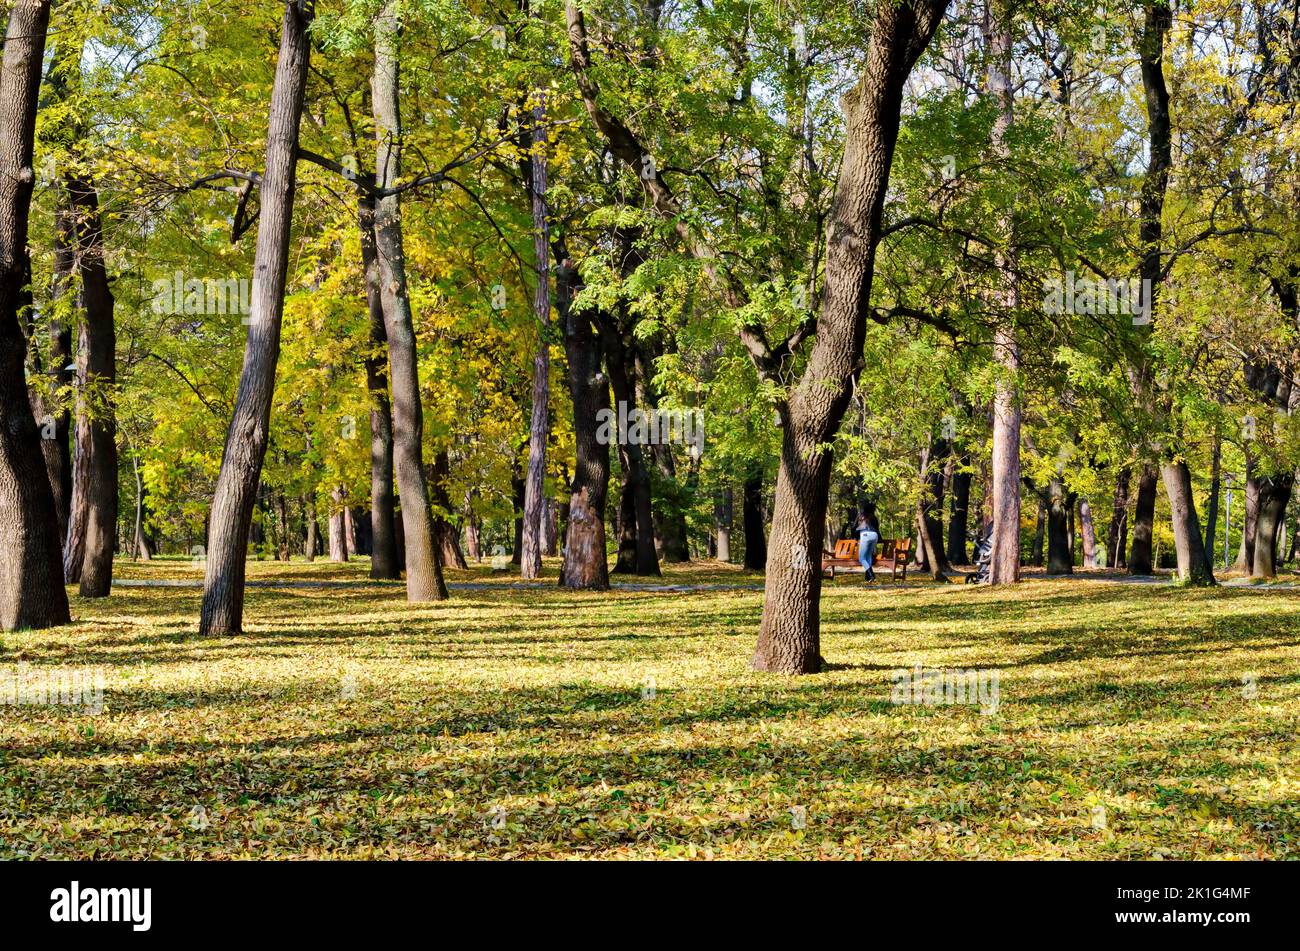 A colorful autumn forest with beautiful branching trees with many yellow, green and brown leaves Stock Photo